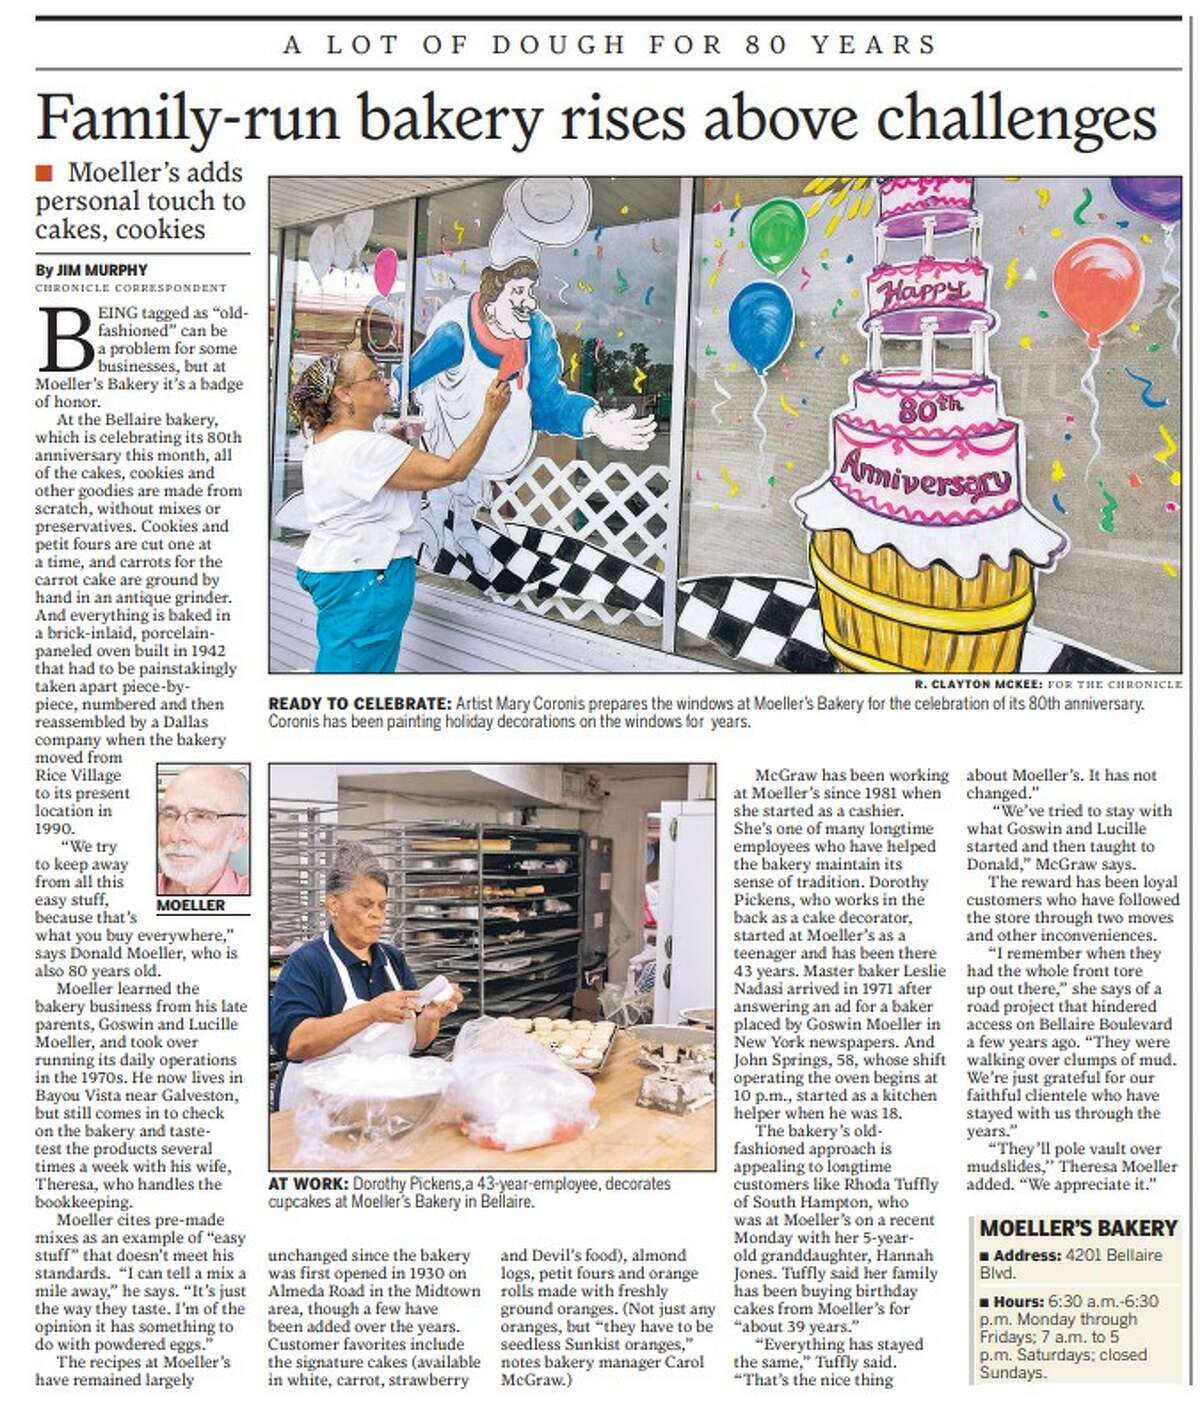 An article about Moeller's Bakery in the Examiner newspapers of Bellaire, River Oaks and West University.